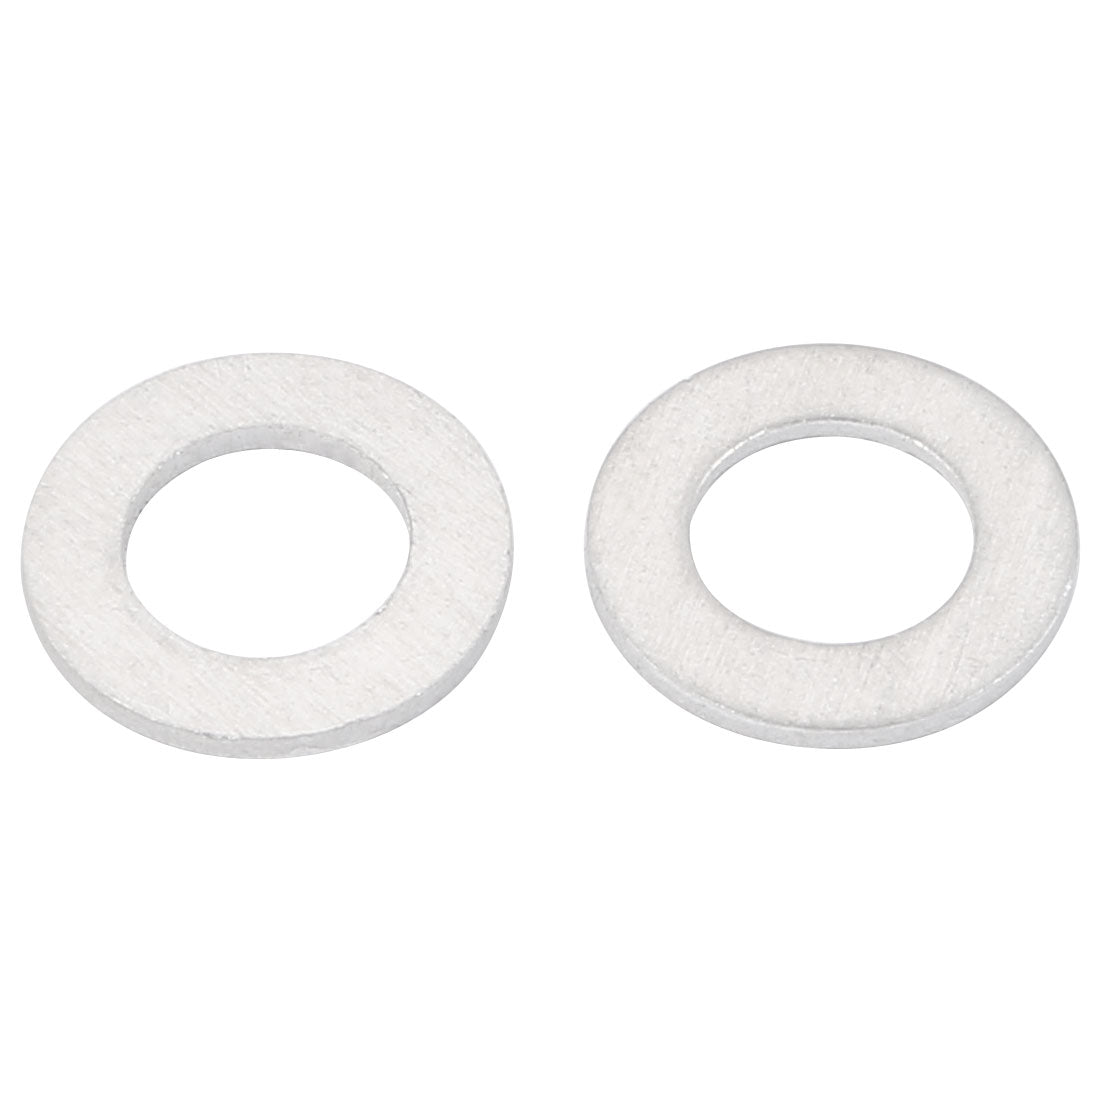 uxcell Uxcell 8mmx14mmx1mm Motorcycle Hardware Drain Plug Crush Aluminum Washer Seals 100pcs